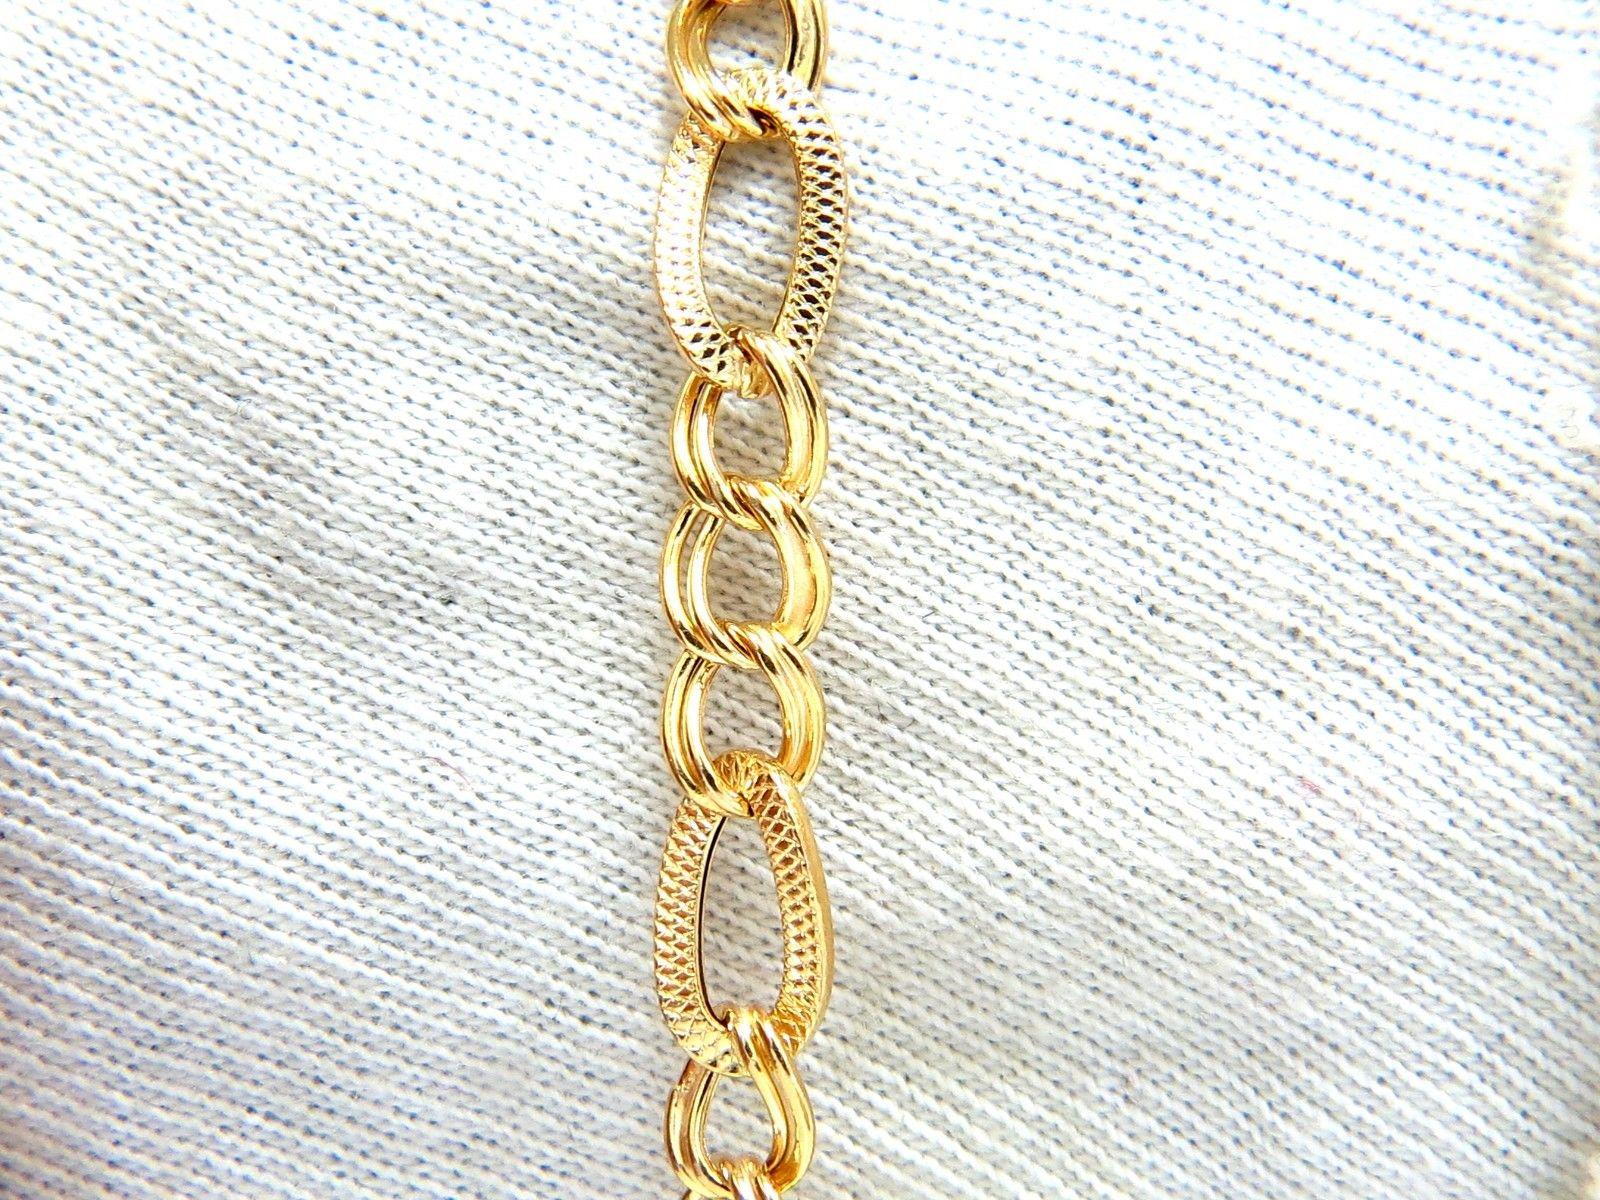 Mod Curb Link Necklace:

24 Inches (wearable length)

 6.4mm

14kt. yellow gold 

14.6 Grams.